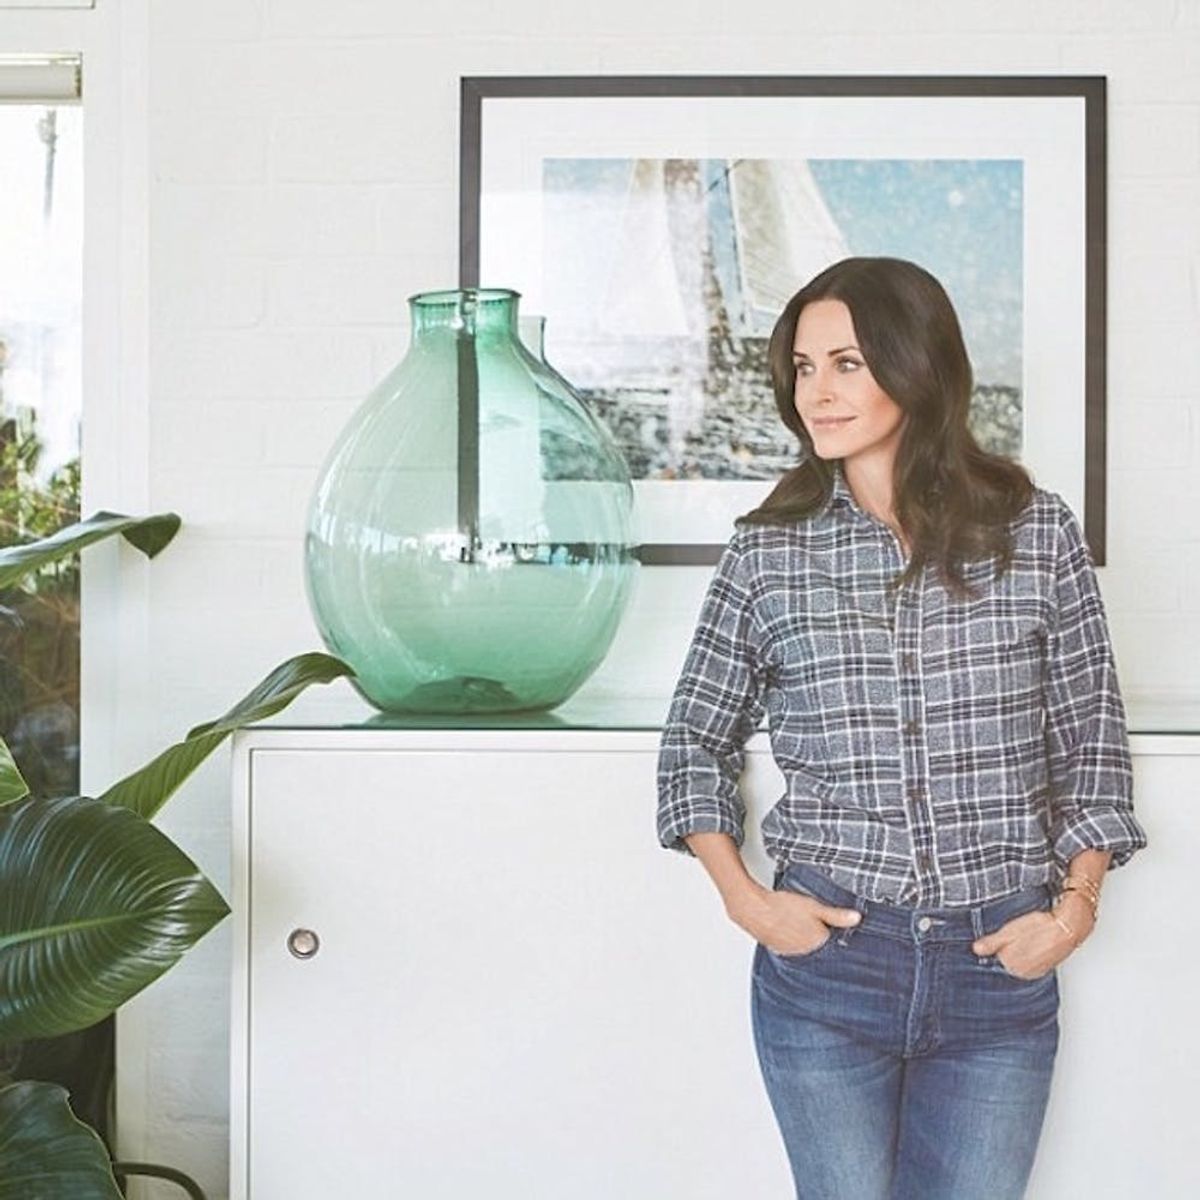 You Can Now Shop Courteney Cox’s Home With This Exclusive Sale from One Kings Lane